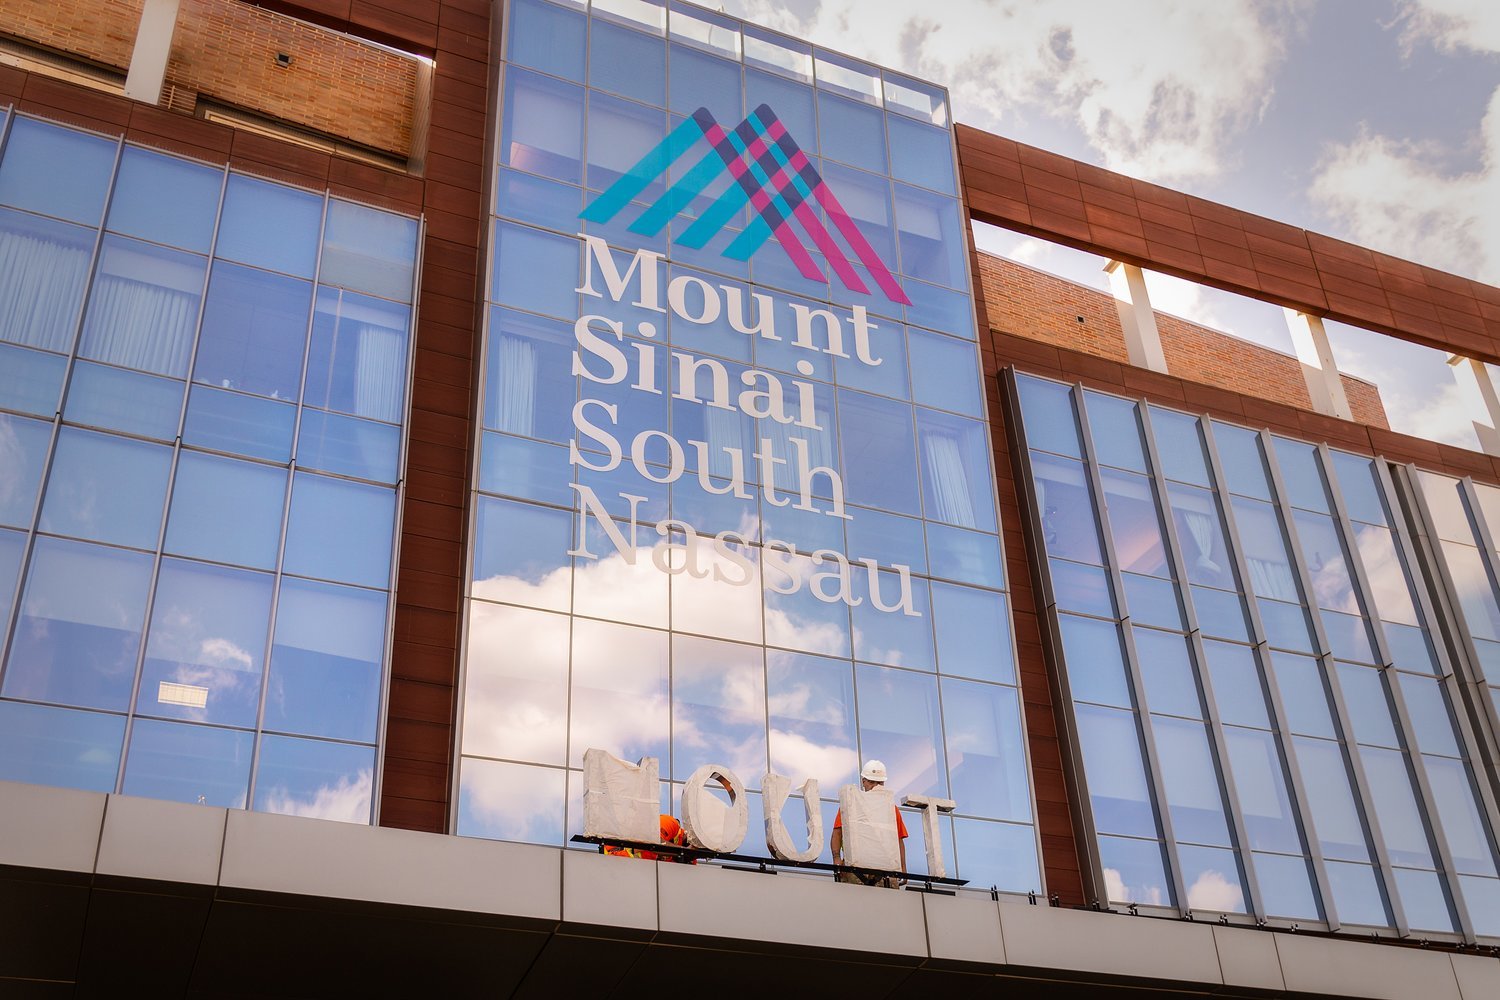 Mount Sinai South Nassau is limiting visitors to its two emergency departments and other areas of the hospital while the Omicron variant continues to spread.